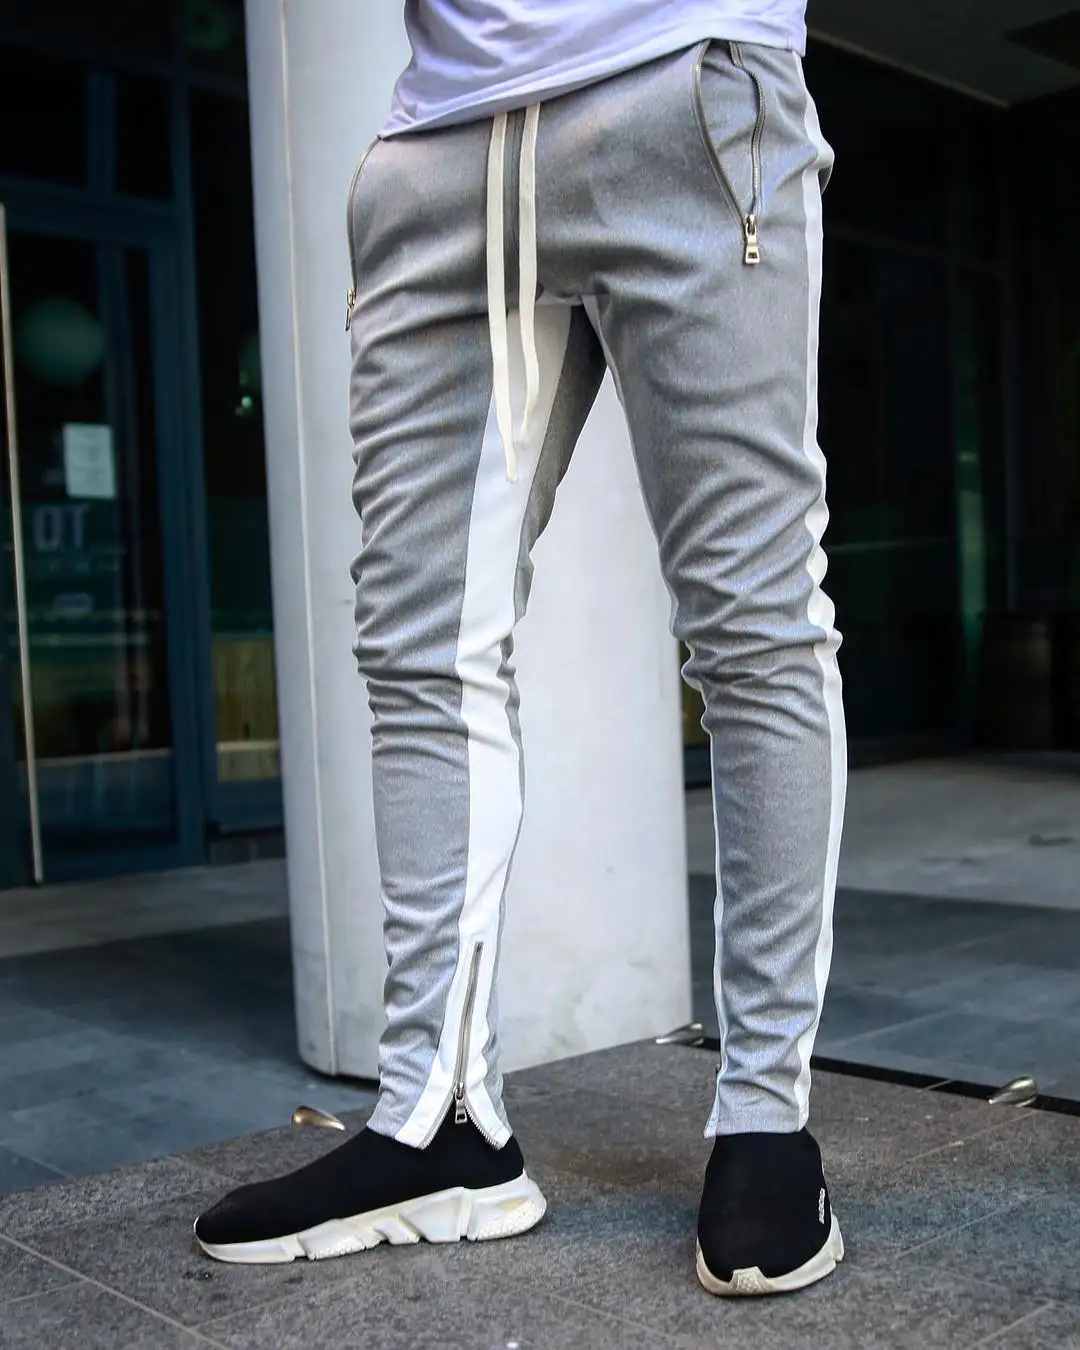 grey track pants 2022 Skinny Sweatpants Trousers Black Gyms Jogger Track Pants Mens Joggers Casual Pants Fitness Men Sportswear Tracksuit Bottoms sports trousers for men